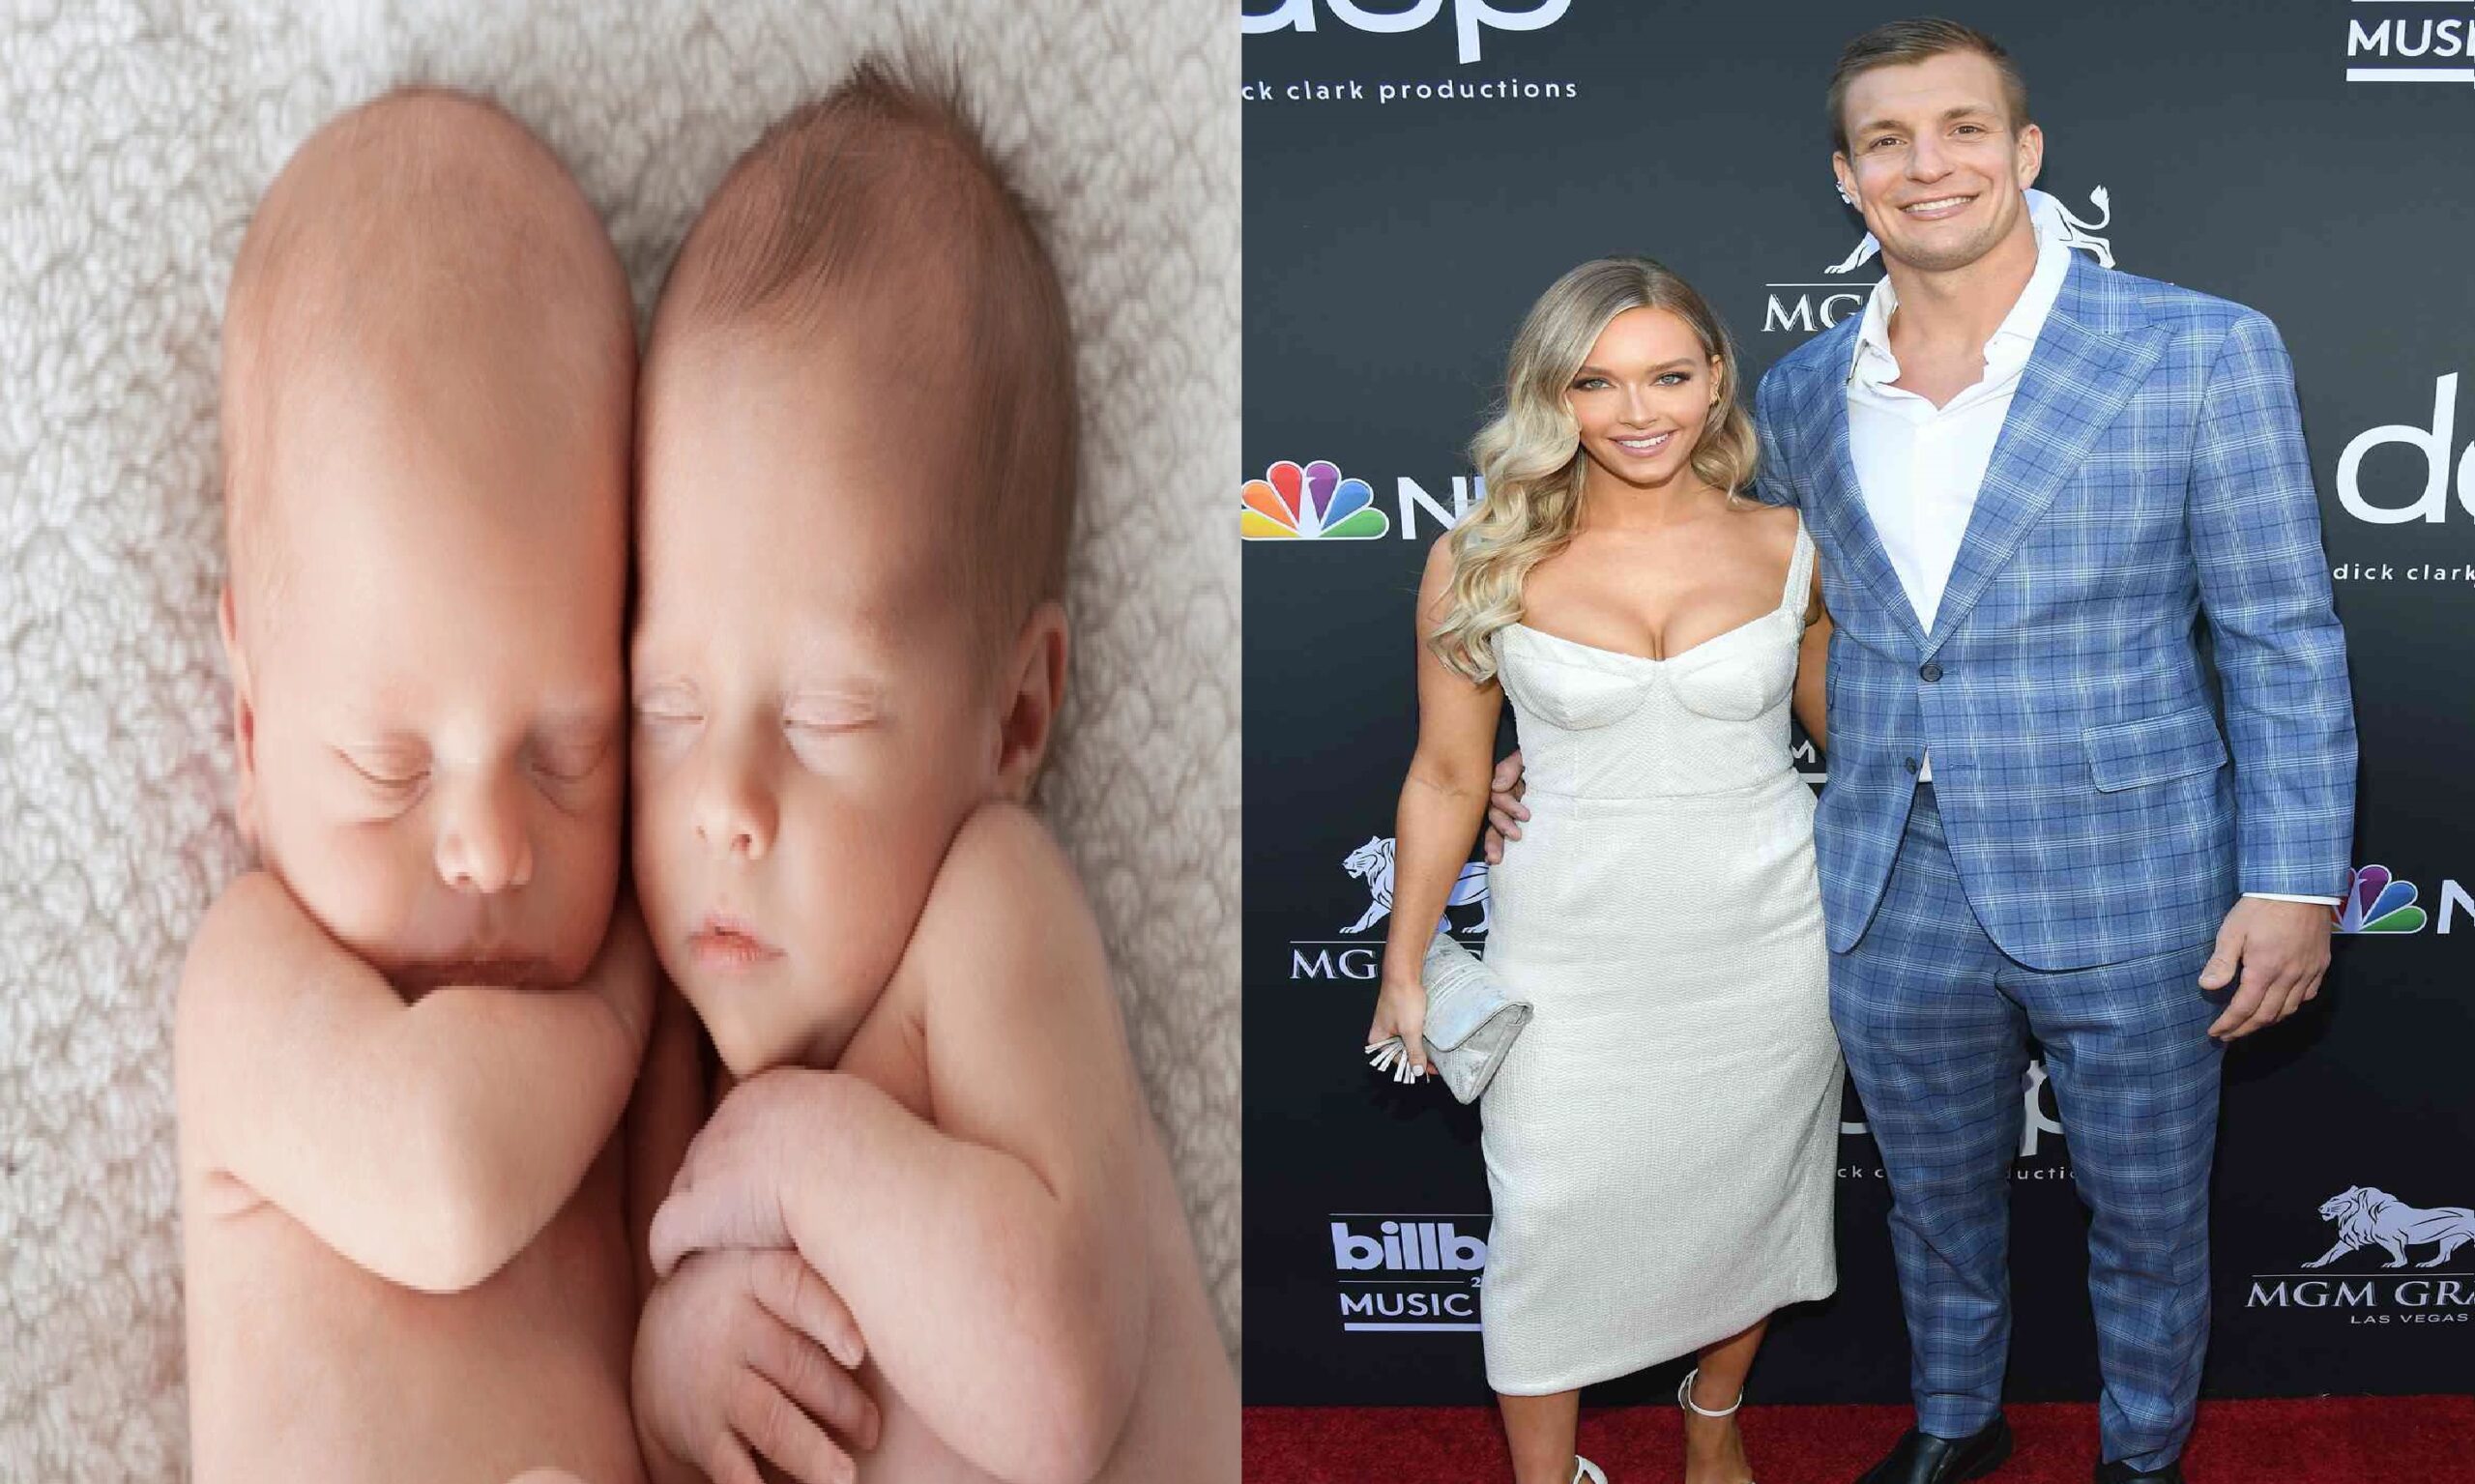 After six years of marriage, NFL legend Rob Gronkowski joyfully welcomes a set of twins with his wife, Camille Kostek.